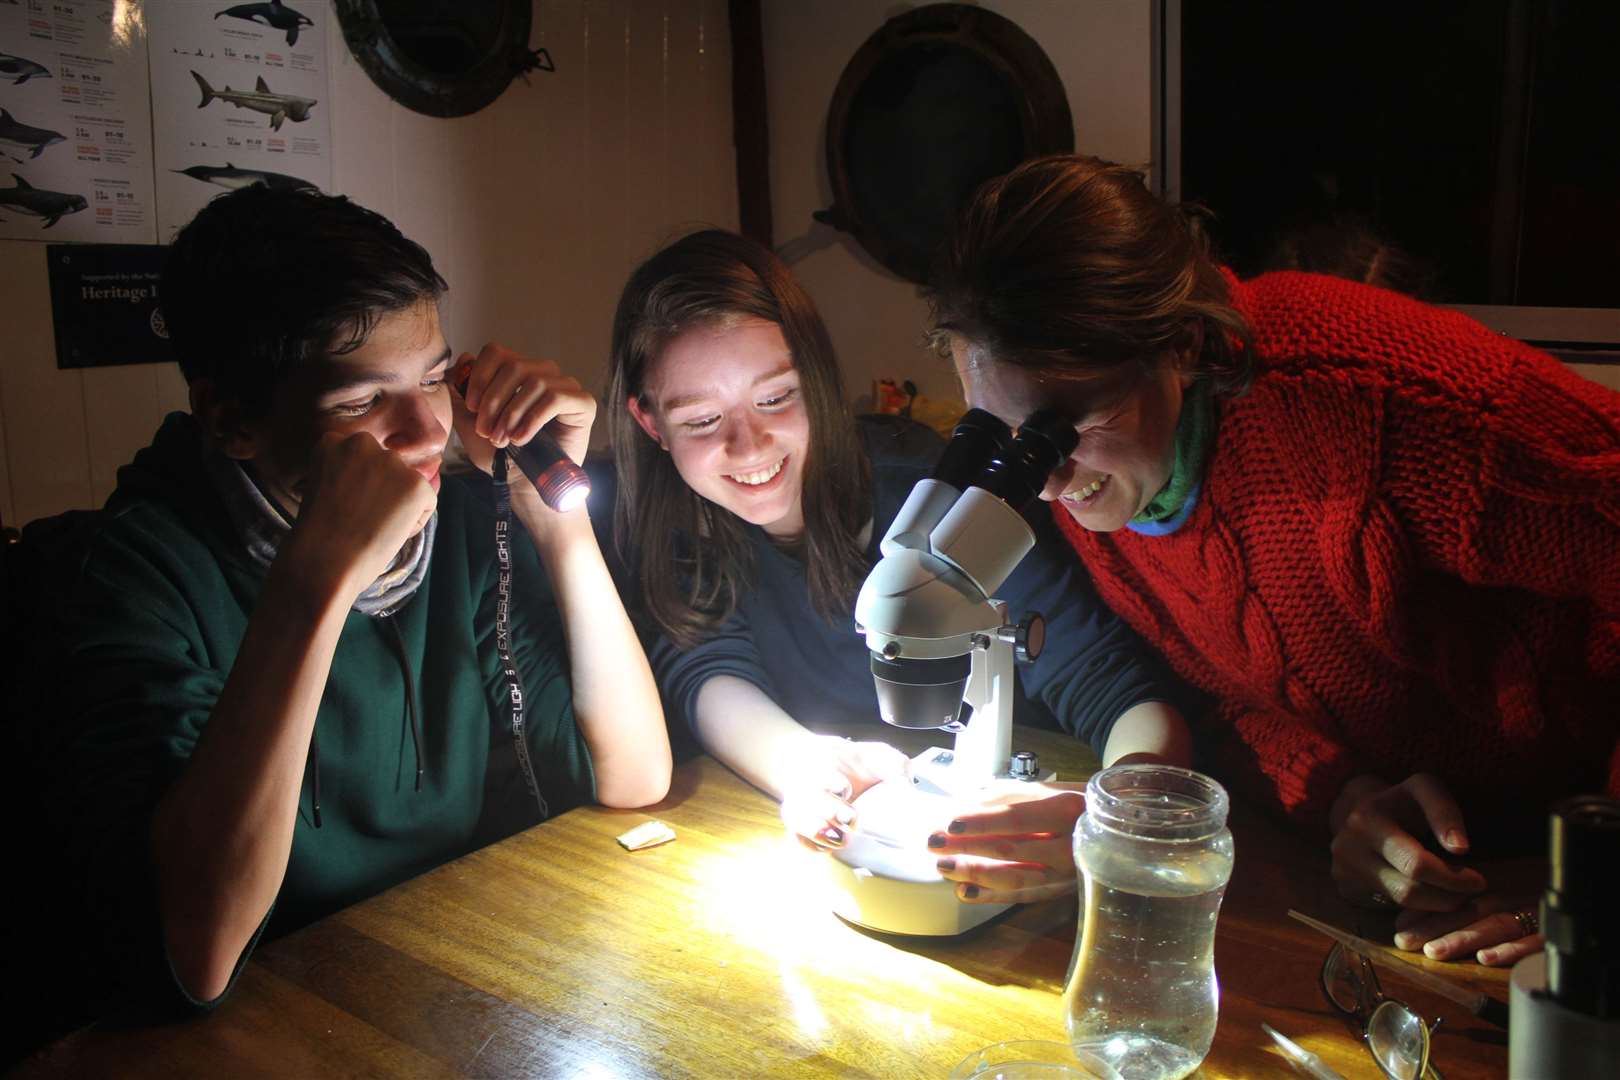 Anyone with a passion for the marine environment can join HWDT on board to become citizen scientists, participate in a Research Expedition, and become trained in how to collect important data.